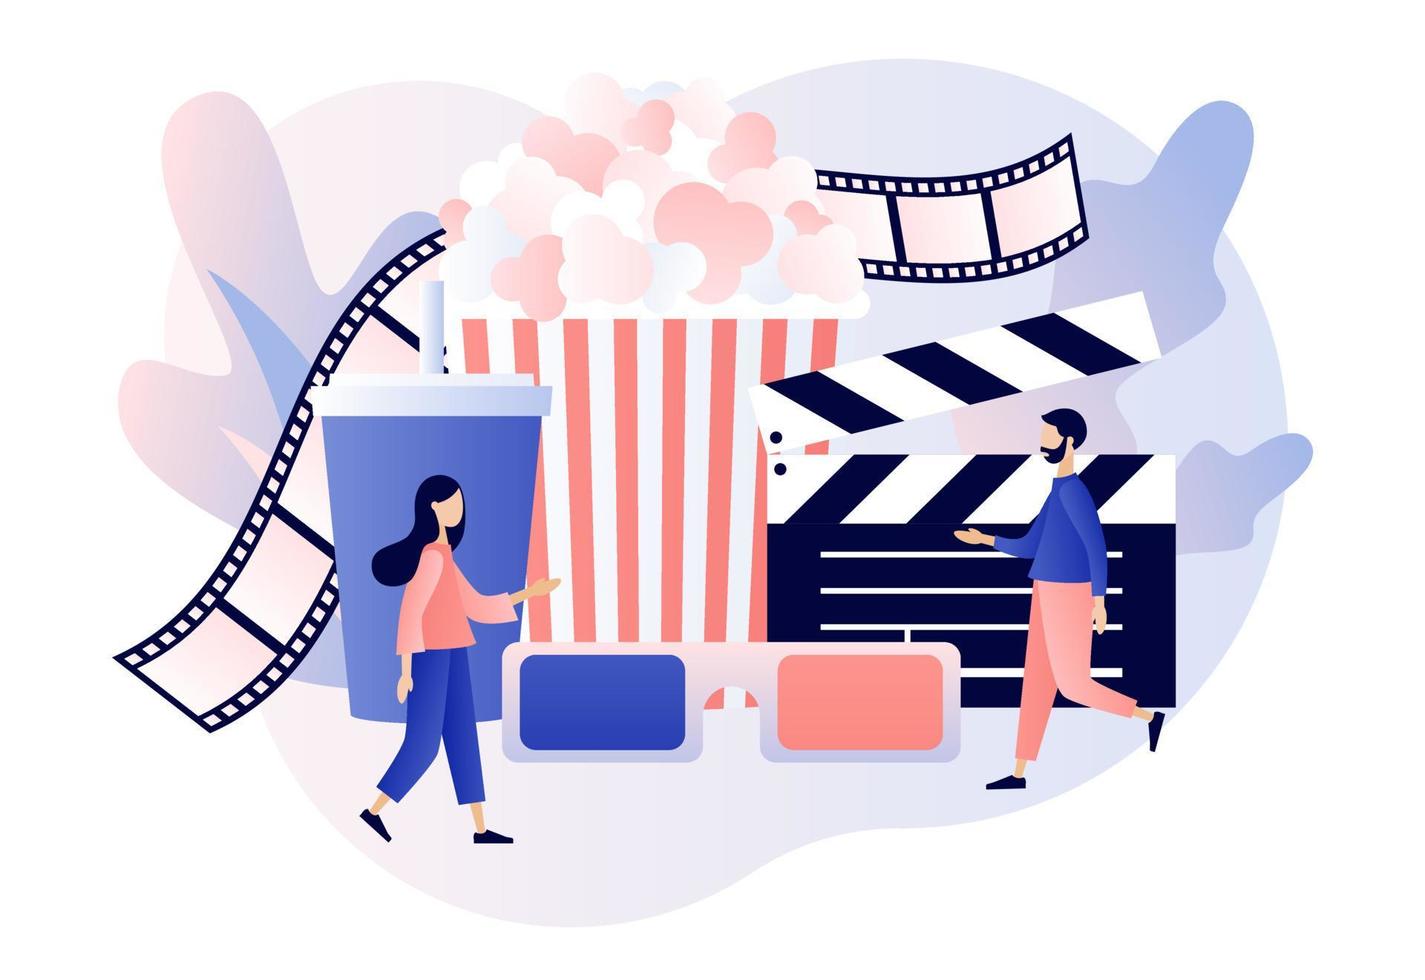 Online cinema. Mobile movie theater. Cinematography. Tiny people watching movie with popcorn,3d glasses and video attributes. Modern flat cartoon style. Vector illustration on white background